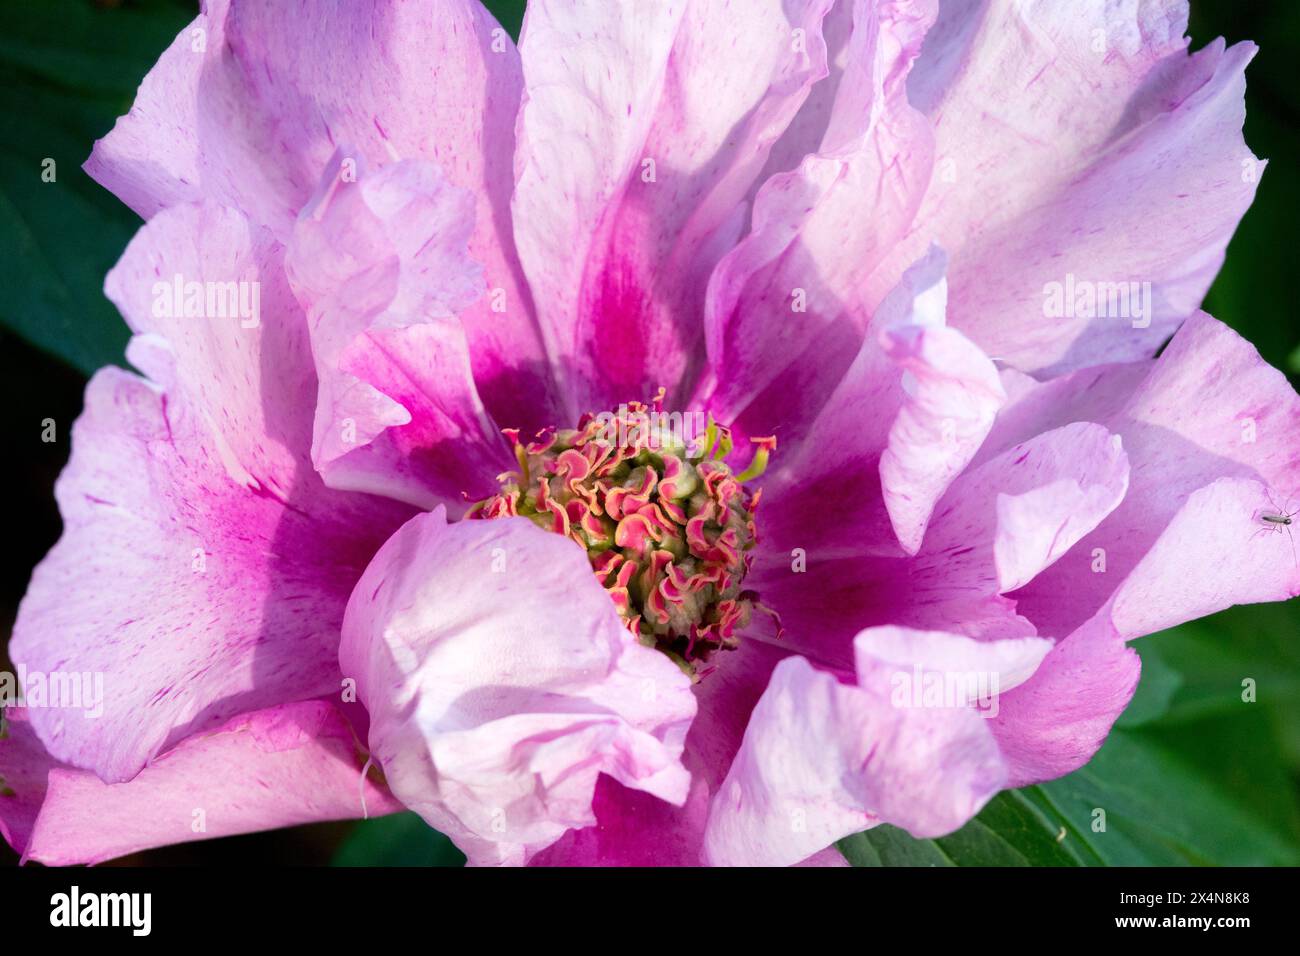 Purple Pink Paeonia 'First Arrival' Itoh Peony Hybrid Flower Head Stock Photo